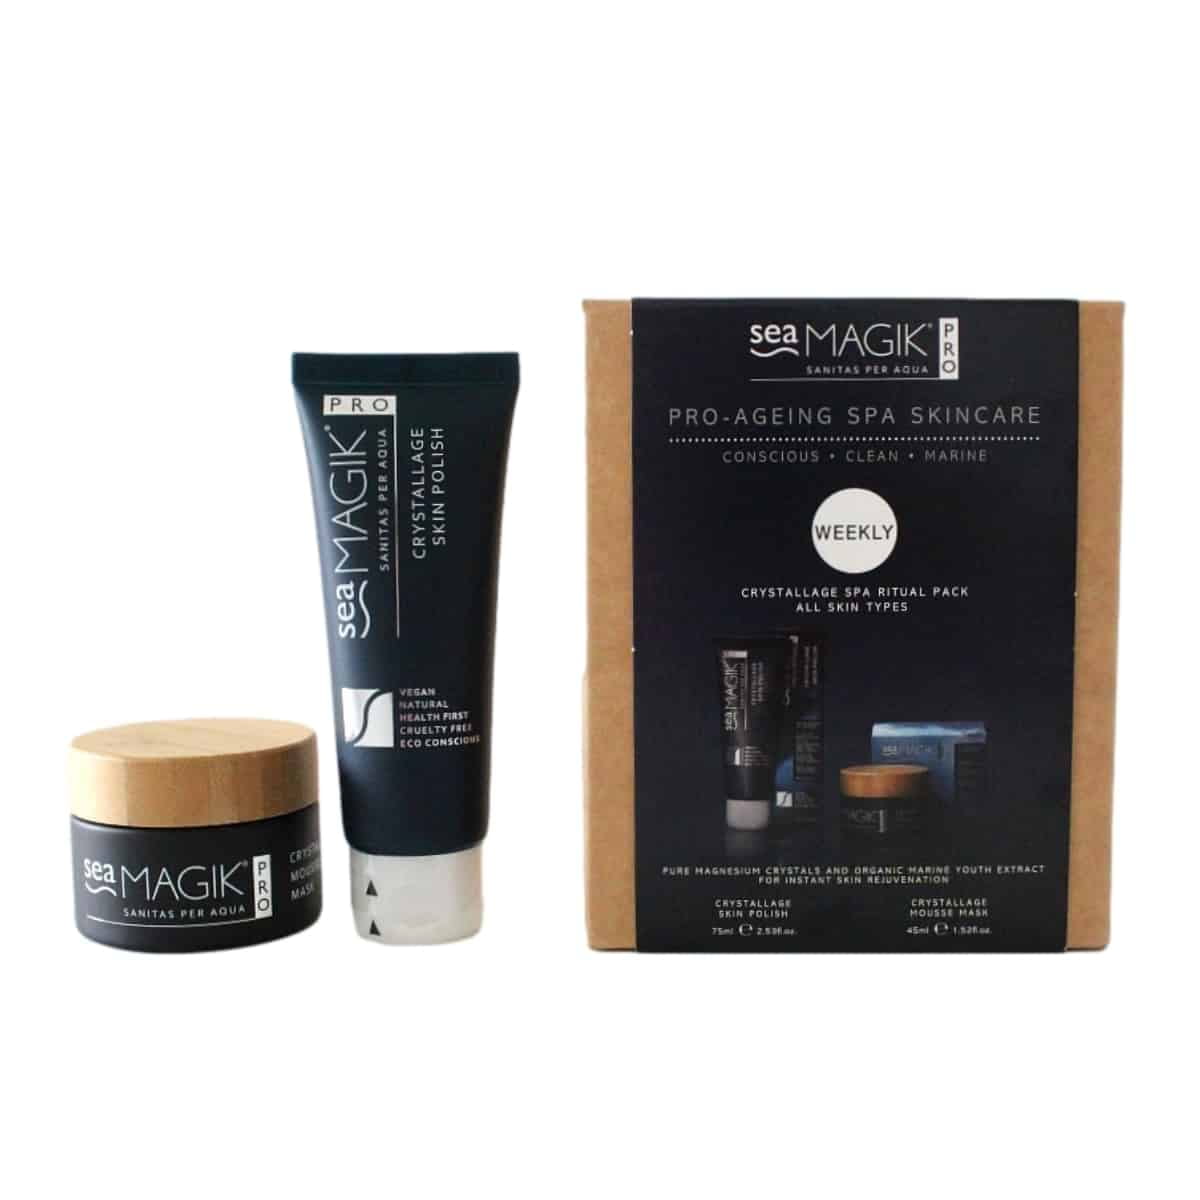 Spa Find Crystallage Pro-Ageing Spa Skincare Weekly Set